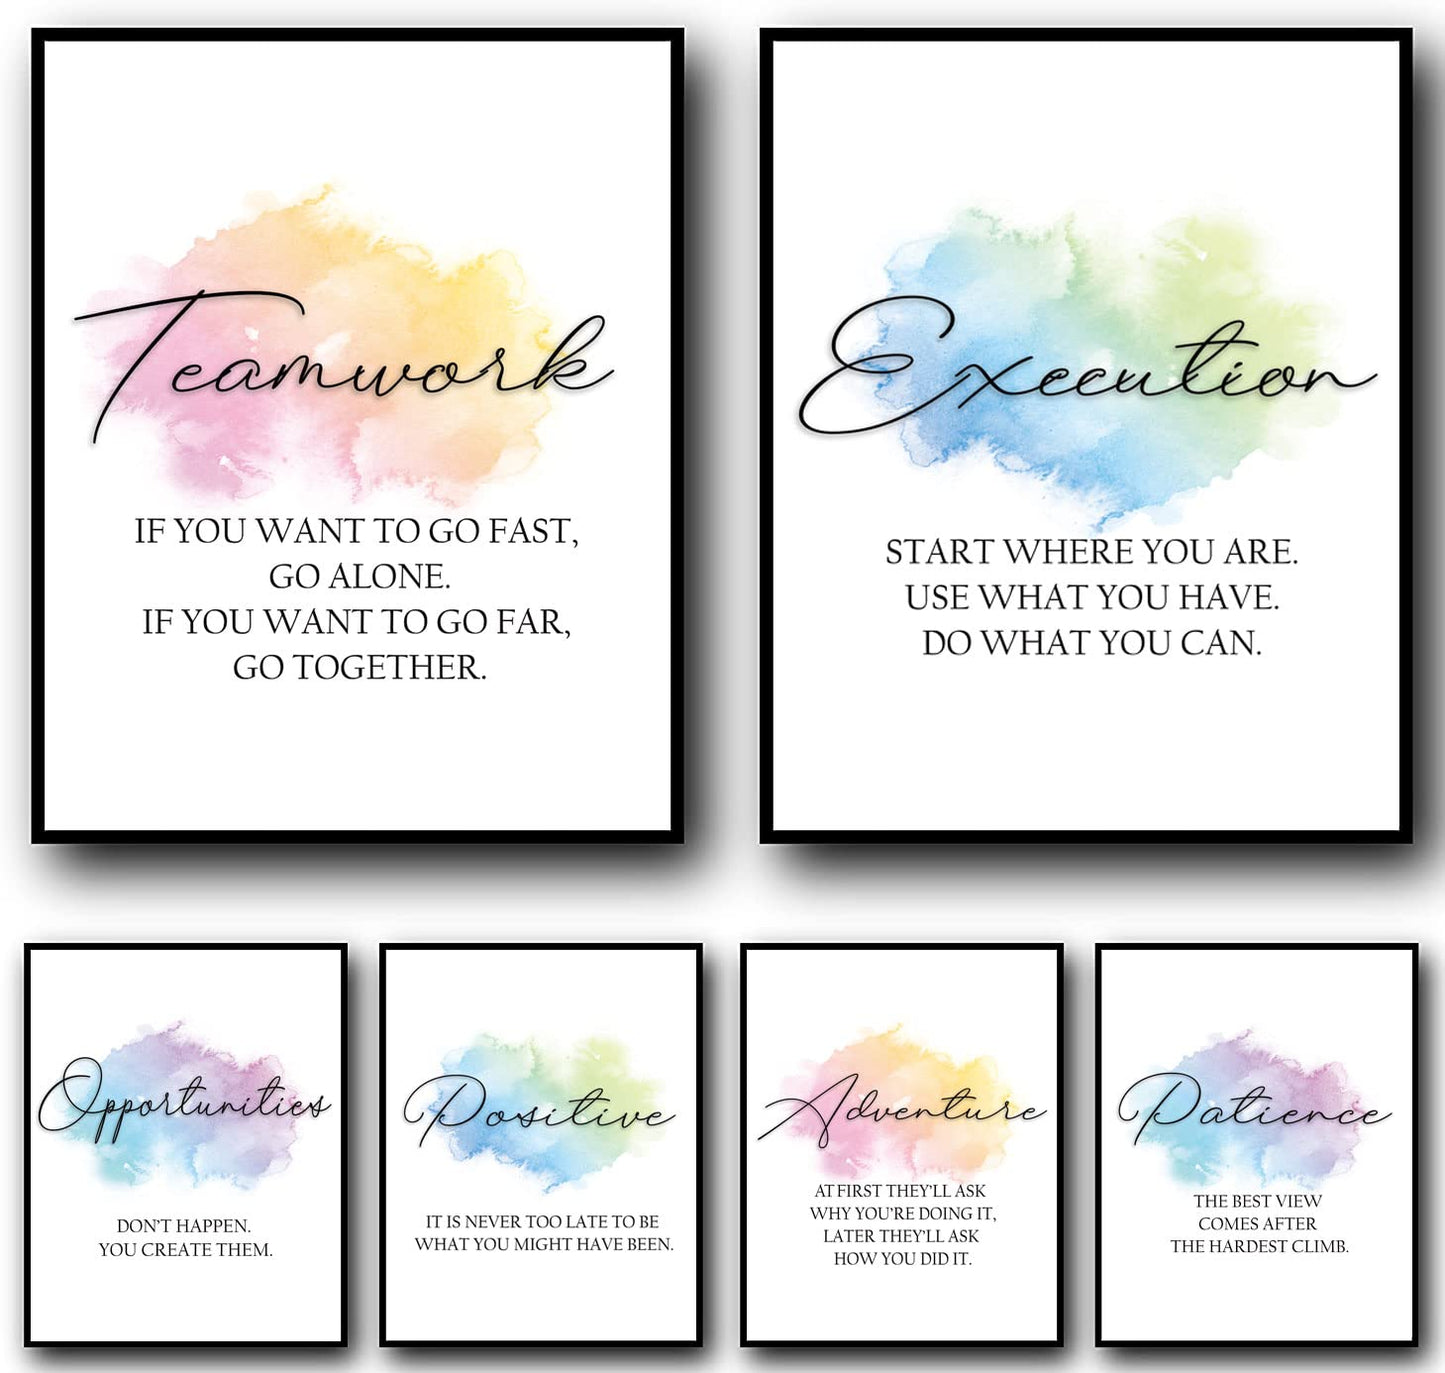 M.MONG PS-02 Colorful Inspirational Wall Art Motivational Quotes Poster Print Positive Artwork Home Decor for Bedroom Living Room Office Decoration (set of 6, 8x10'', UNFRAMED) White